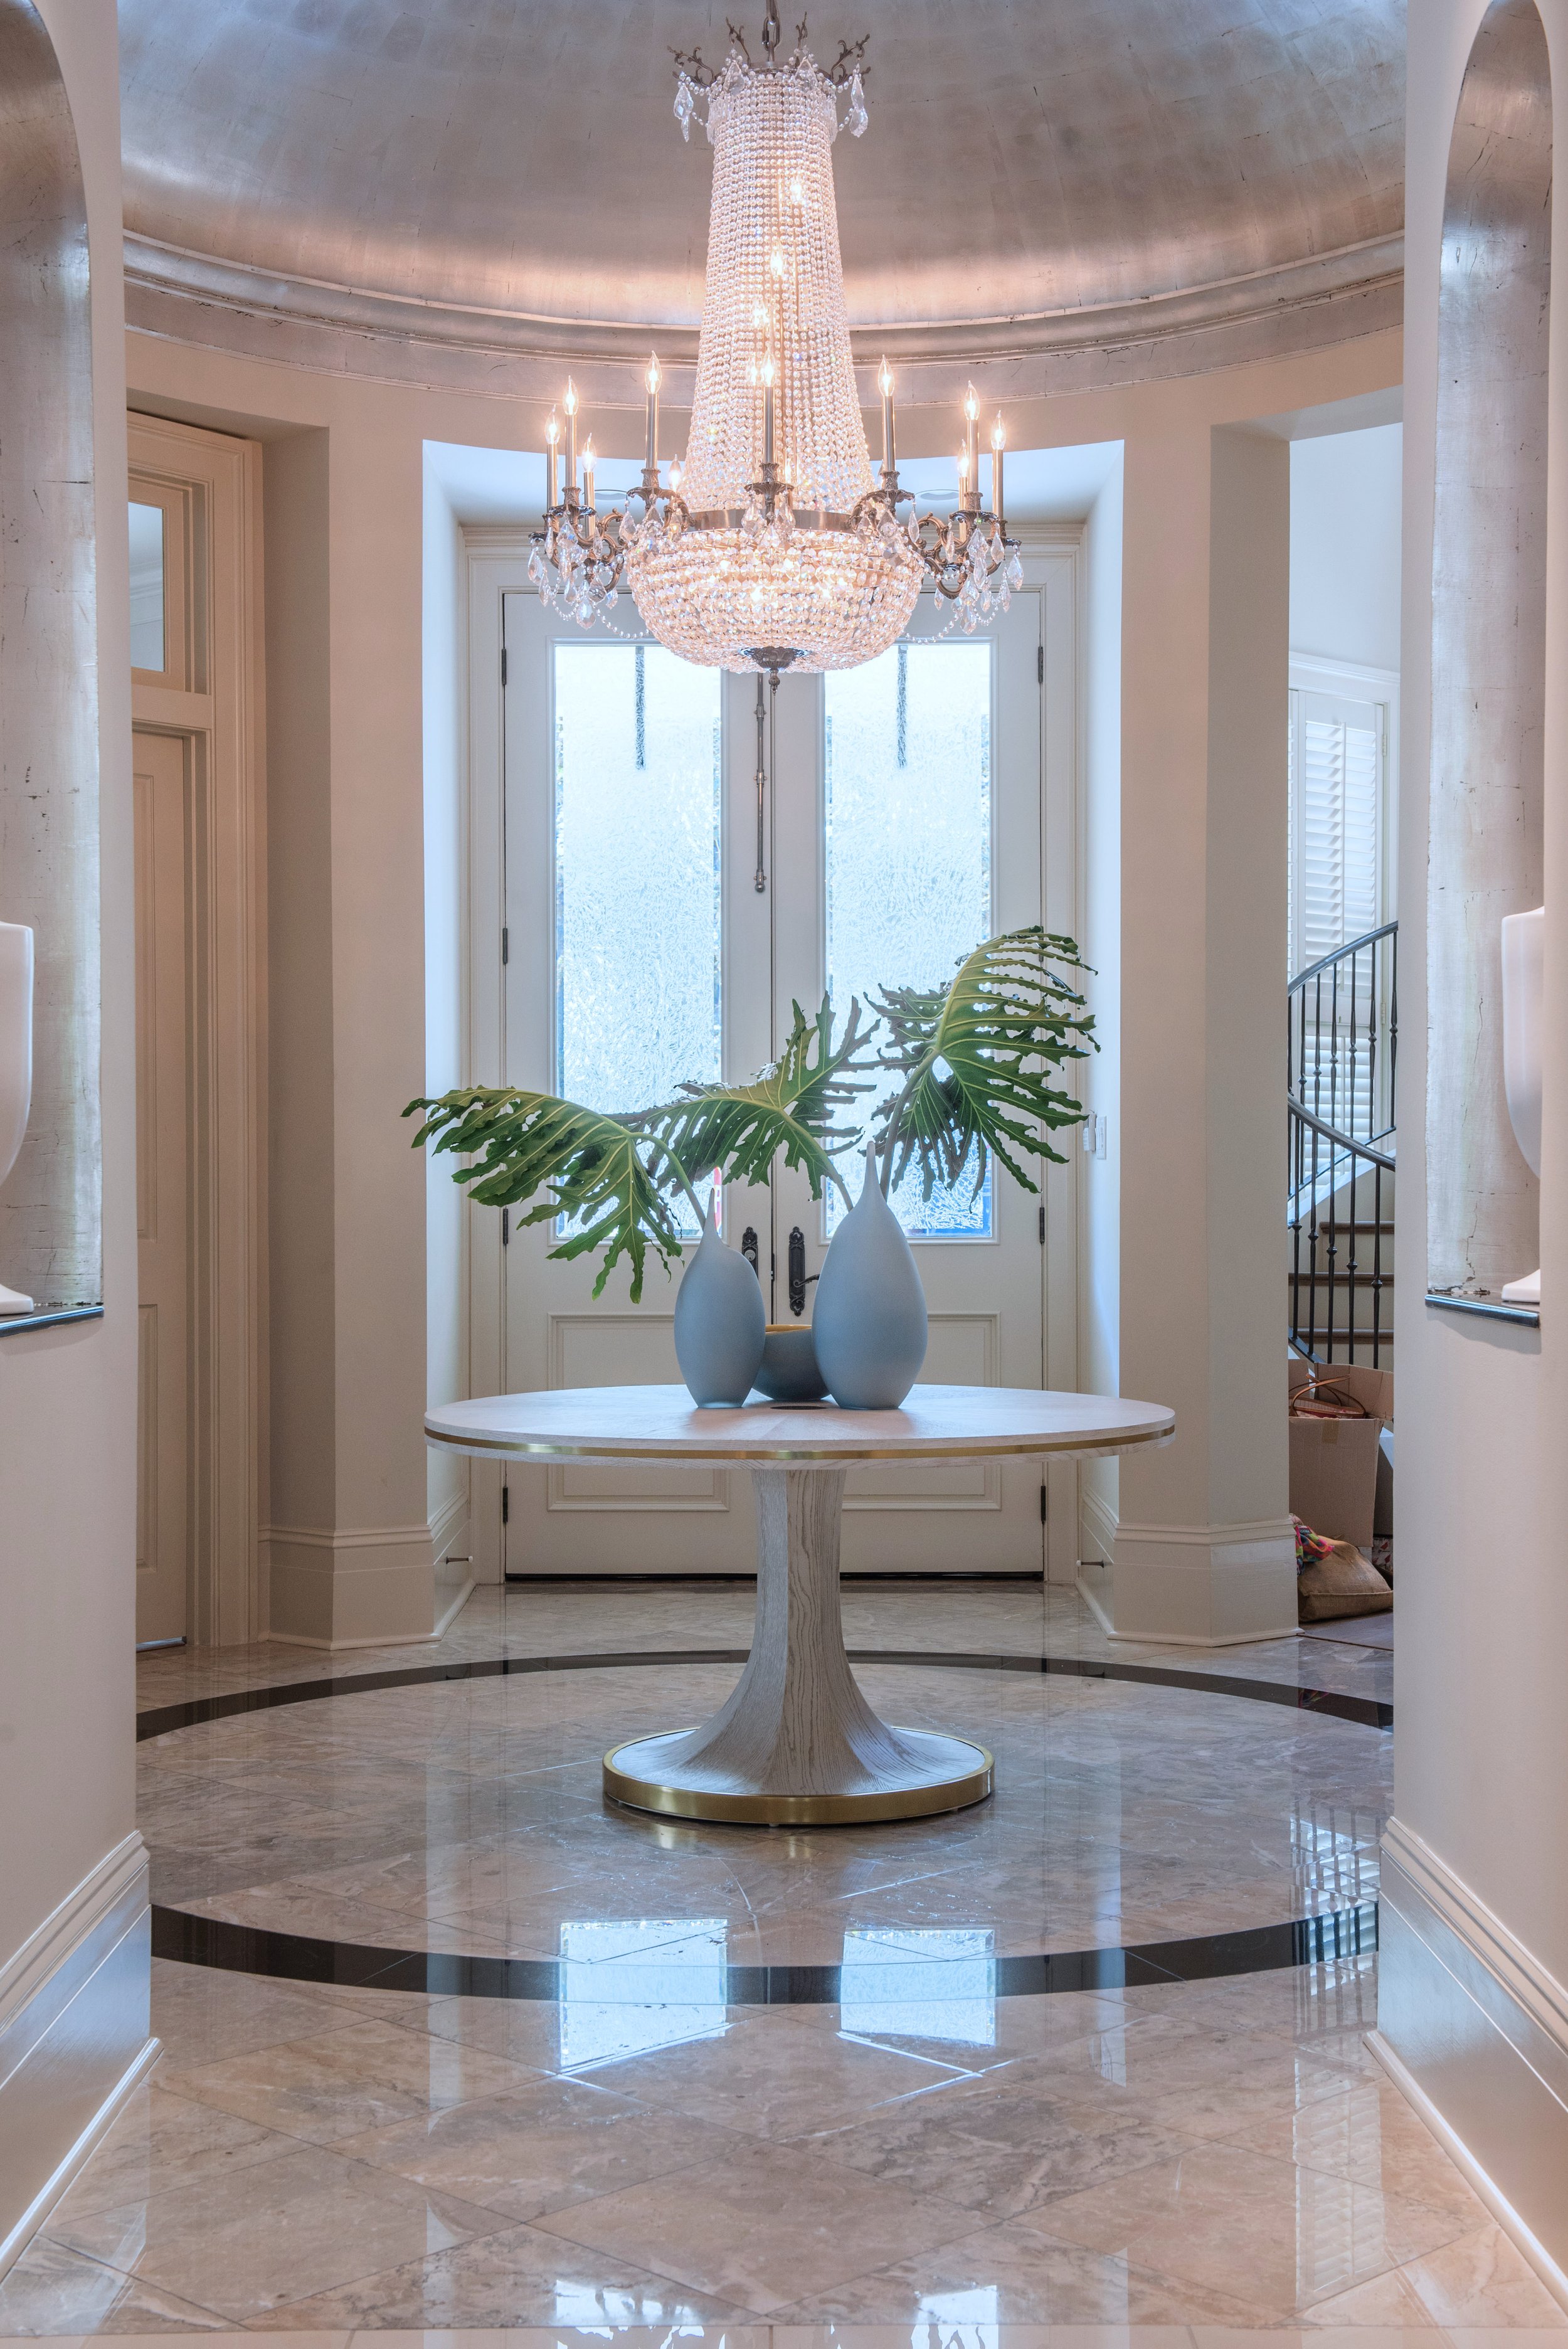 FOYER TO DIE FOR IN NEW ORLEANS INTERIOR DESIGNER AND OLD METAIRIE INTERIORS .jpg